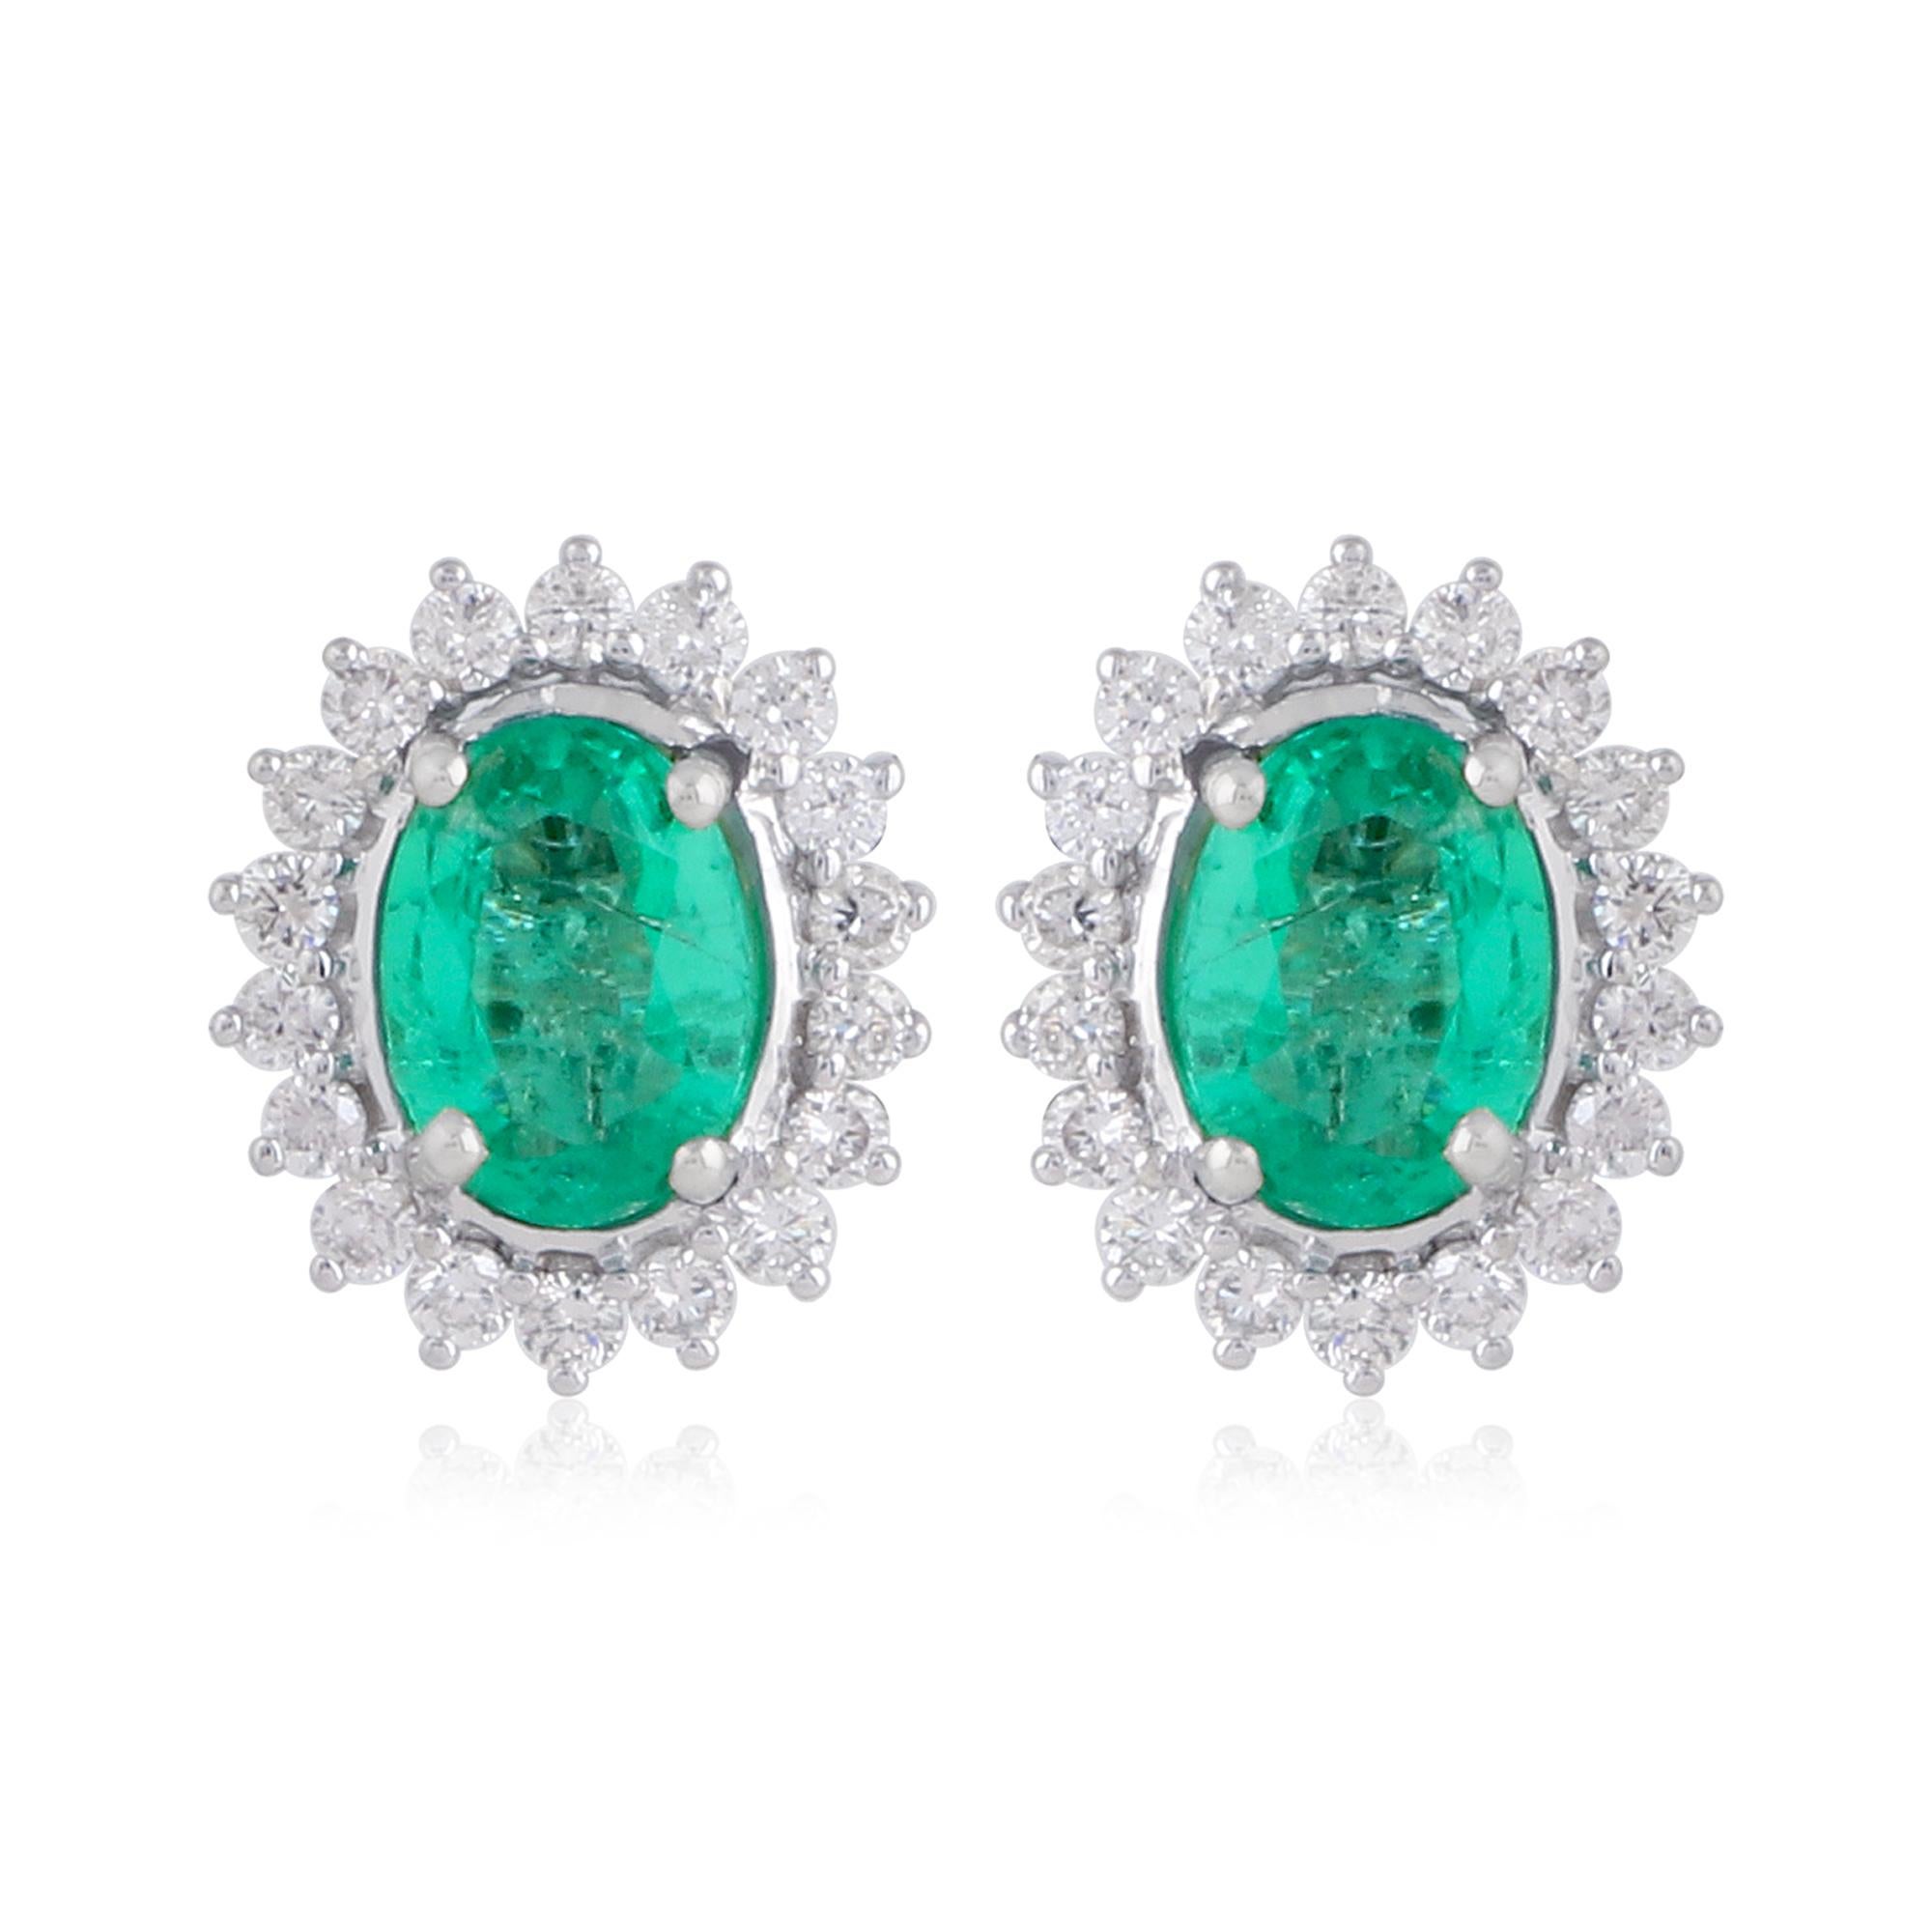 Item Code :- CN-26231
Gross Wt. :- 4.71 gm
18k Solid White Gold Wt. :- 3.87 gm
Natural Diamond Wt. :- 0.70 Ct. ( AVERAGE DIAMOND CLARITY SI1-SI2 & COLOR H-I )
Zambian Emerald Wt. :- 3.50 Ct.
Earrings Size :- 13.2 x 11.2 mm approx.

✦